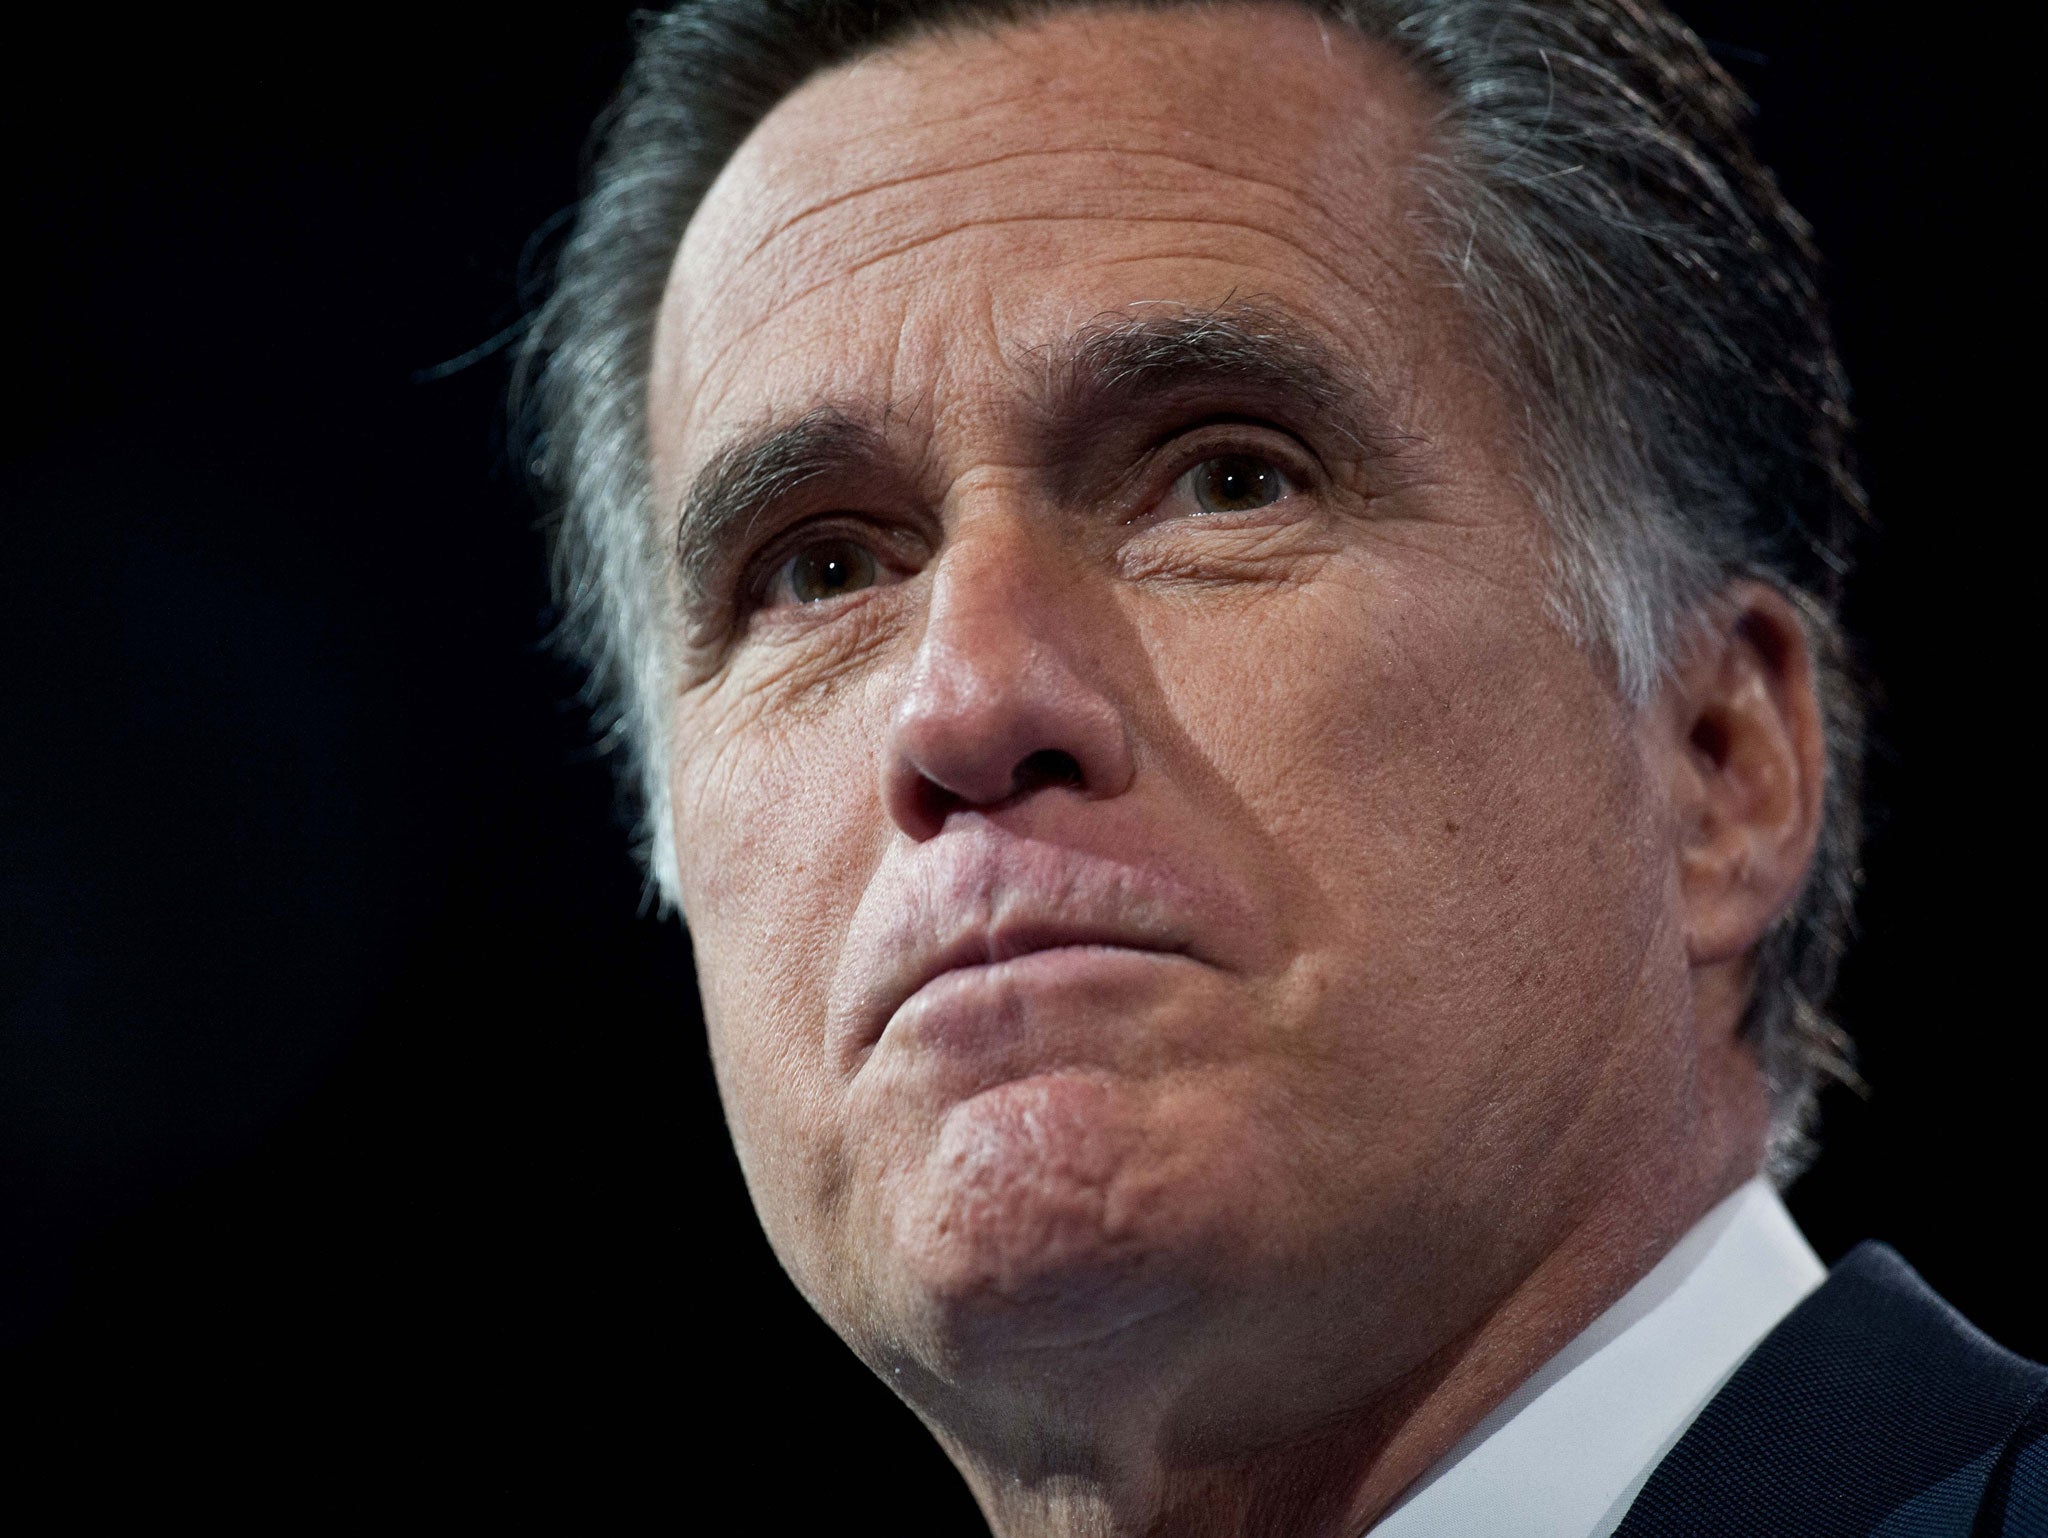 Mitt Romney has accepted Melissa Harris-Perry's apology after panelists on her US programme made fun of his African-American grandson